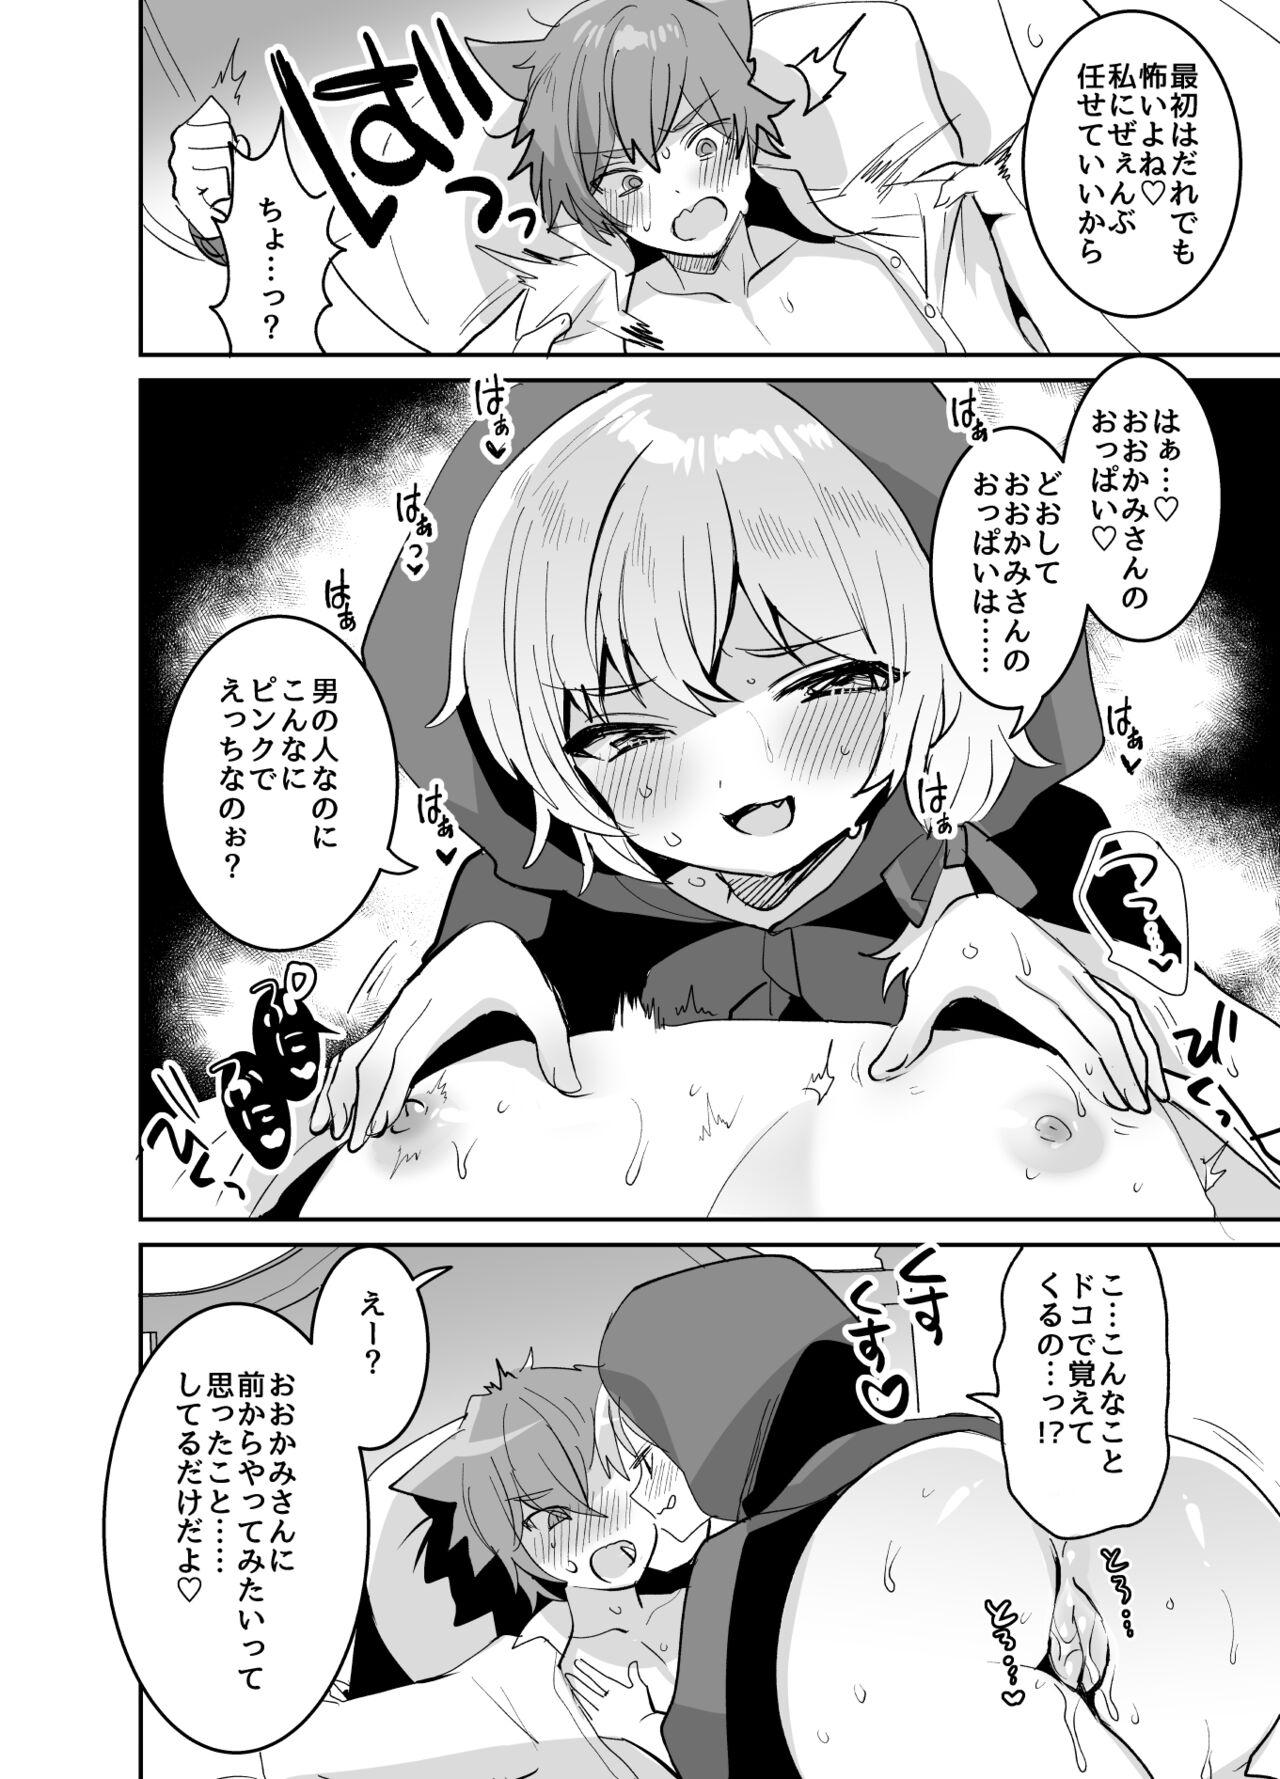 Tattooed 赤ずきんちゃんに犯される!! - Little red riding hood Time - Page 11